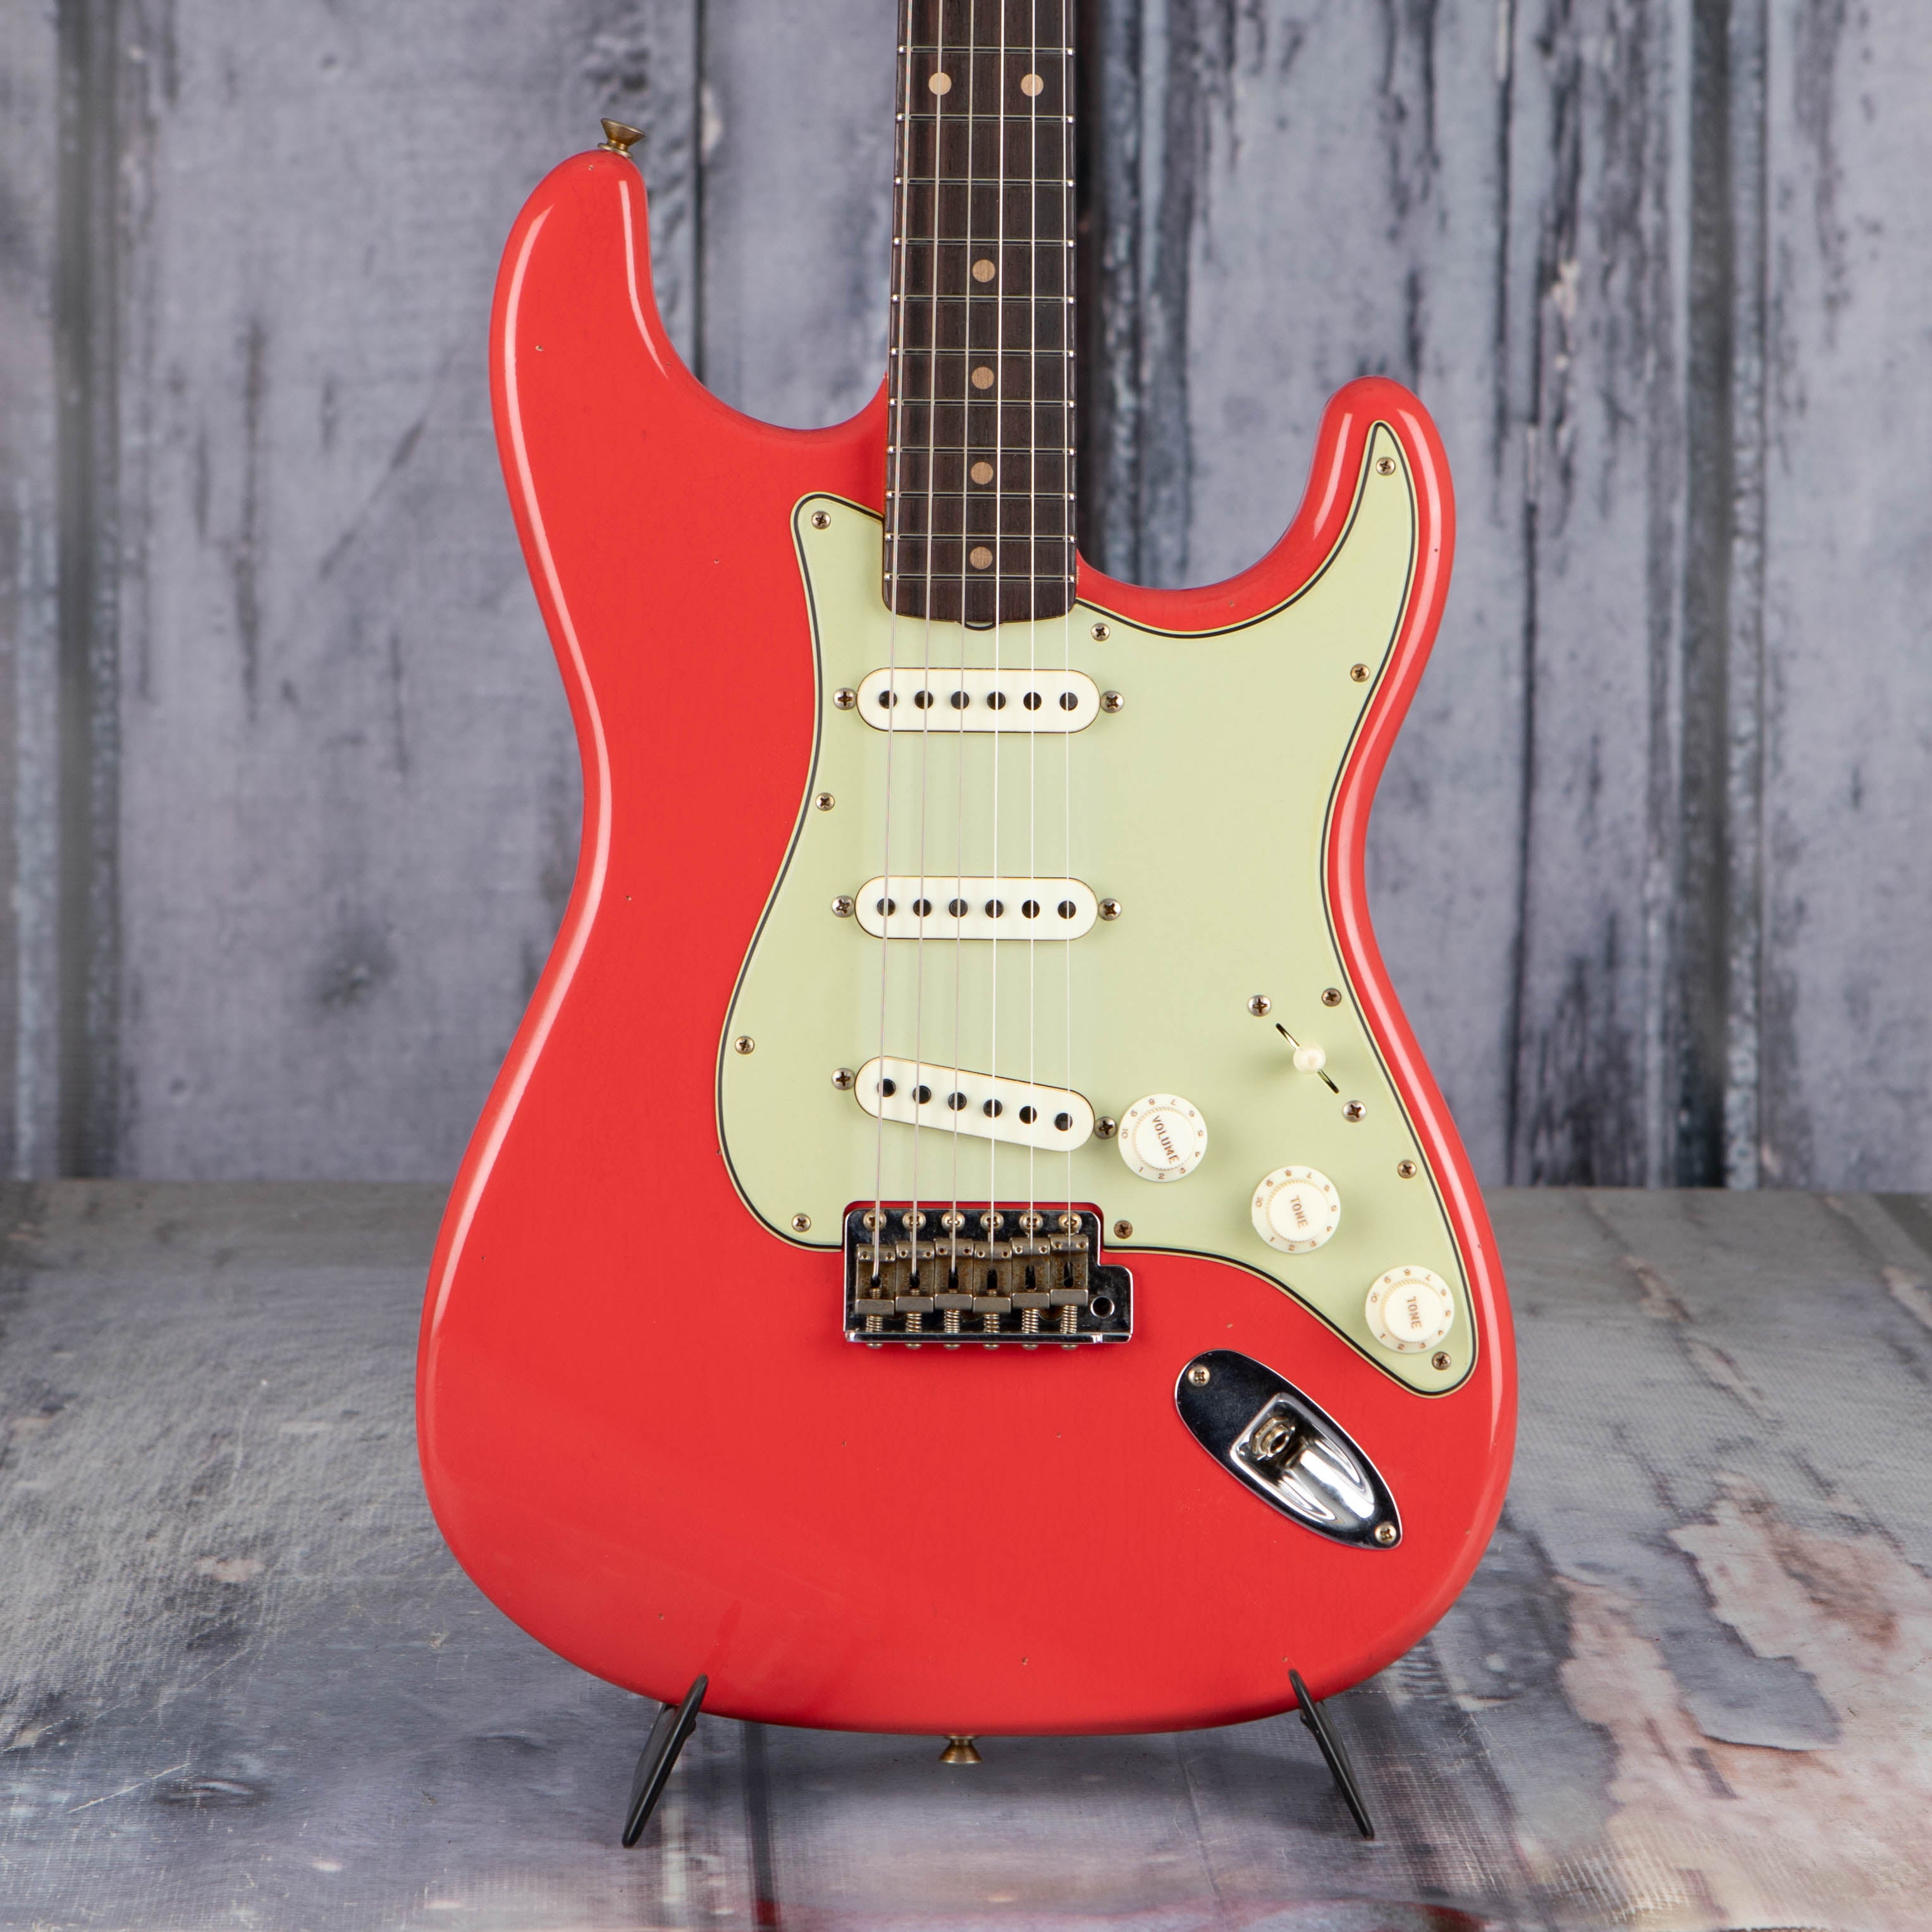 Fender Custom Shop Limited '62/'63 Stratocaster Journeyman Relic Electric Guitar, Aged Fiesta Red, front closeup